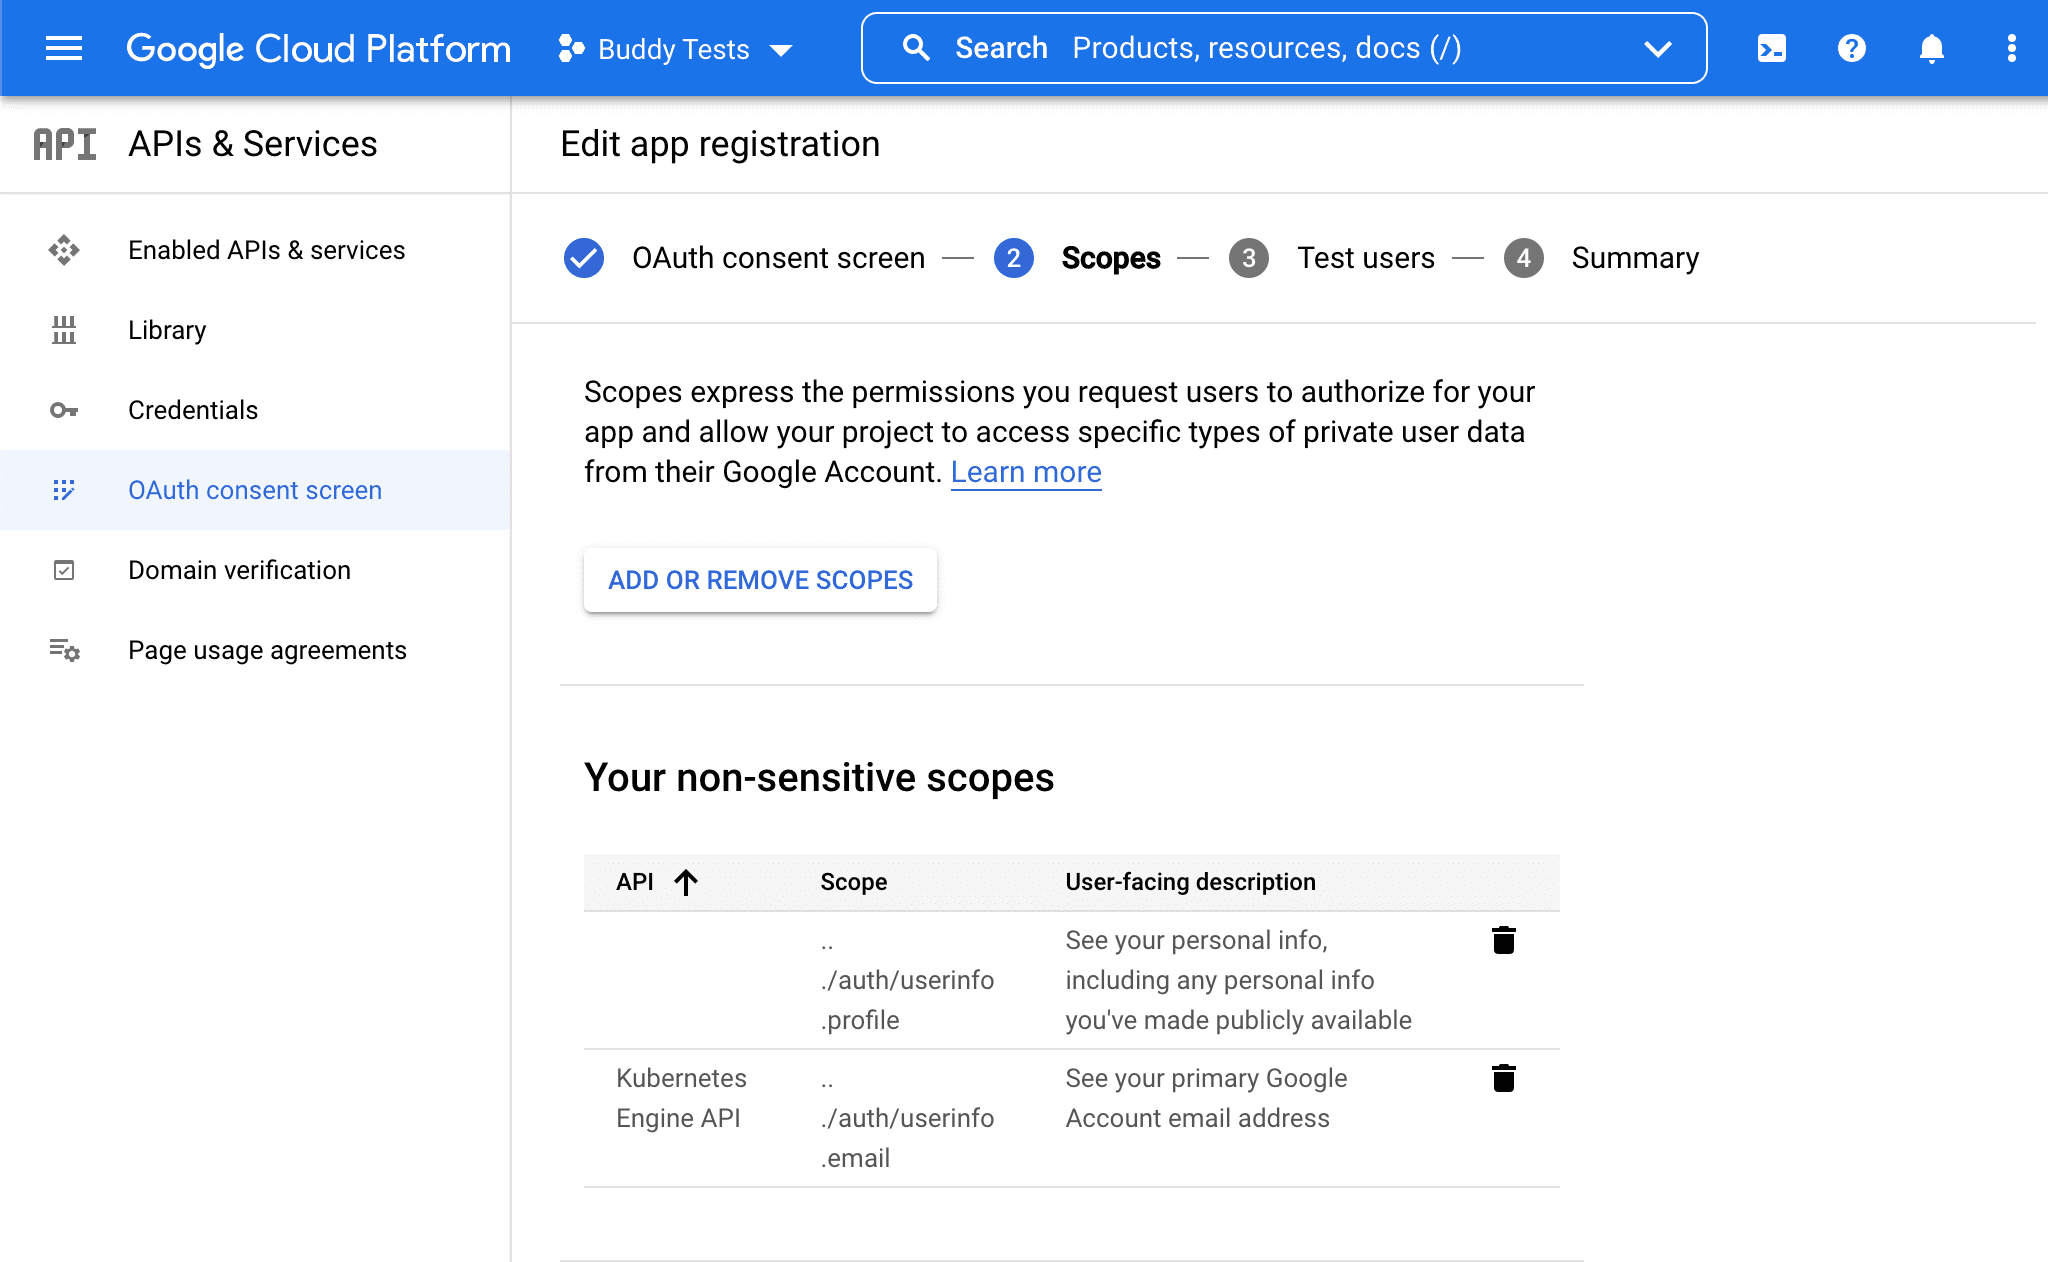 OAuth consent screen configuration